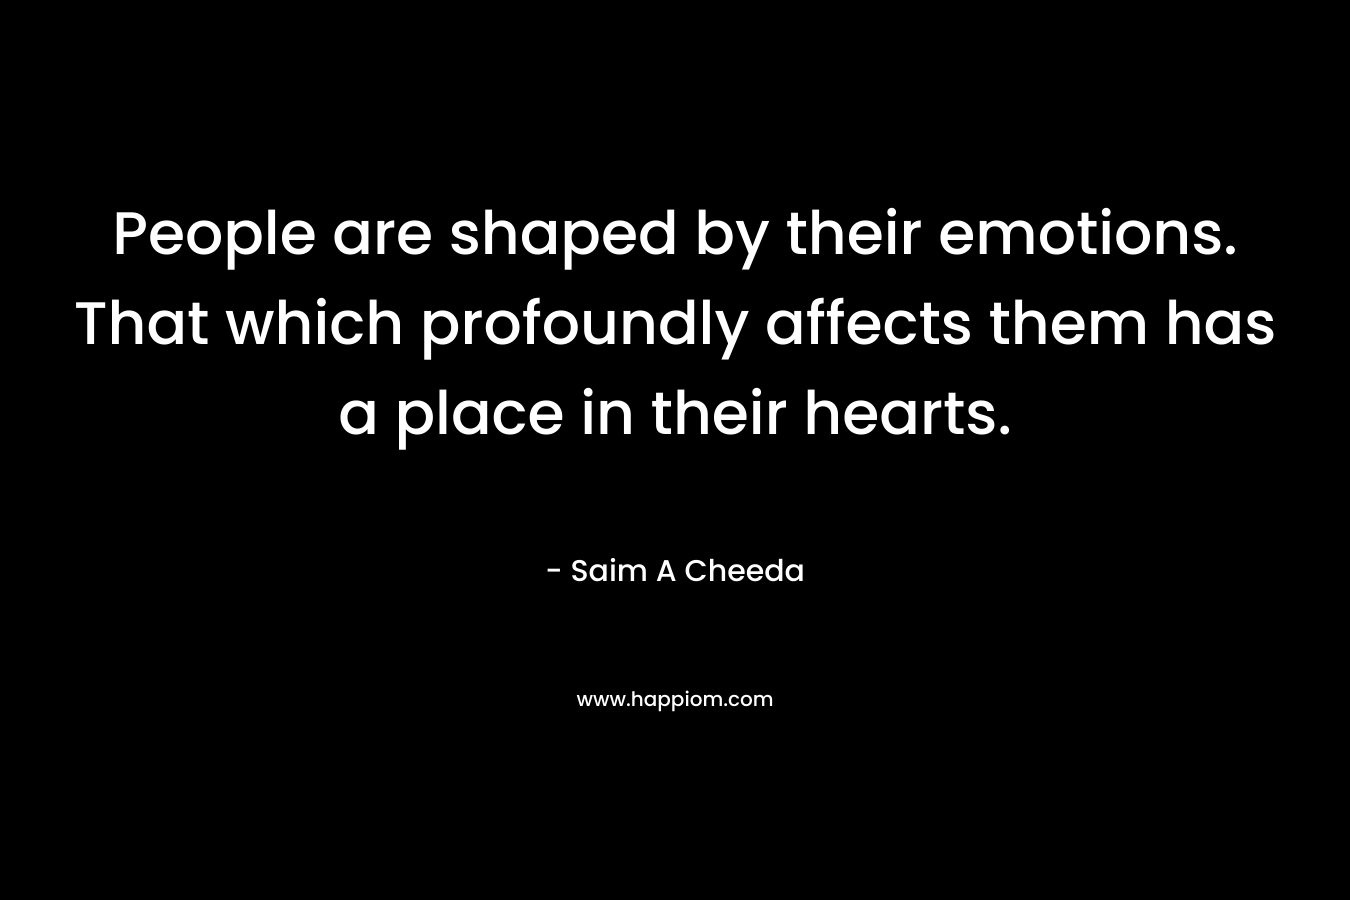 People are shaped by their emotions. That which profoundly affects them has a place in their hearts.